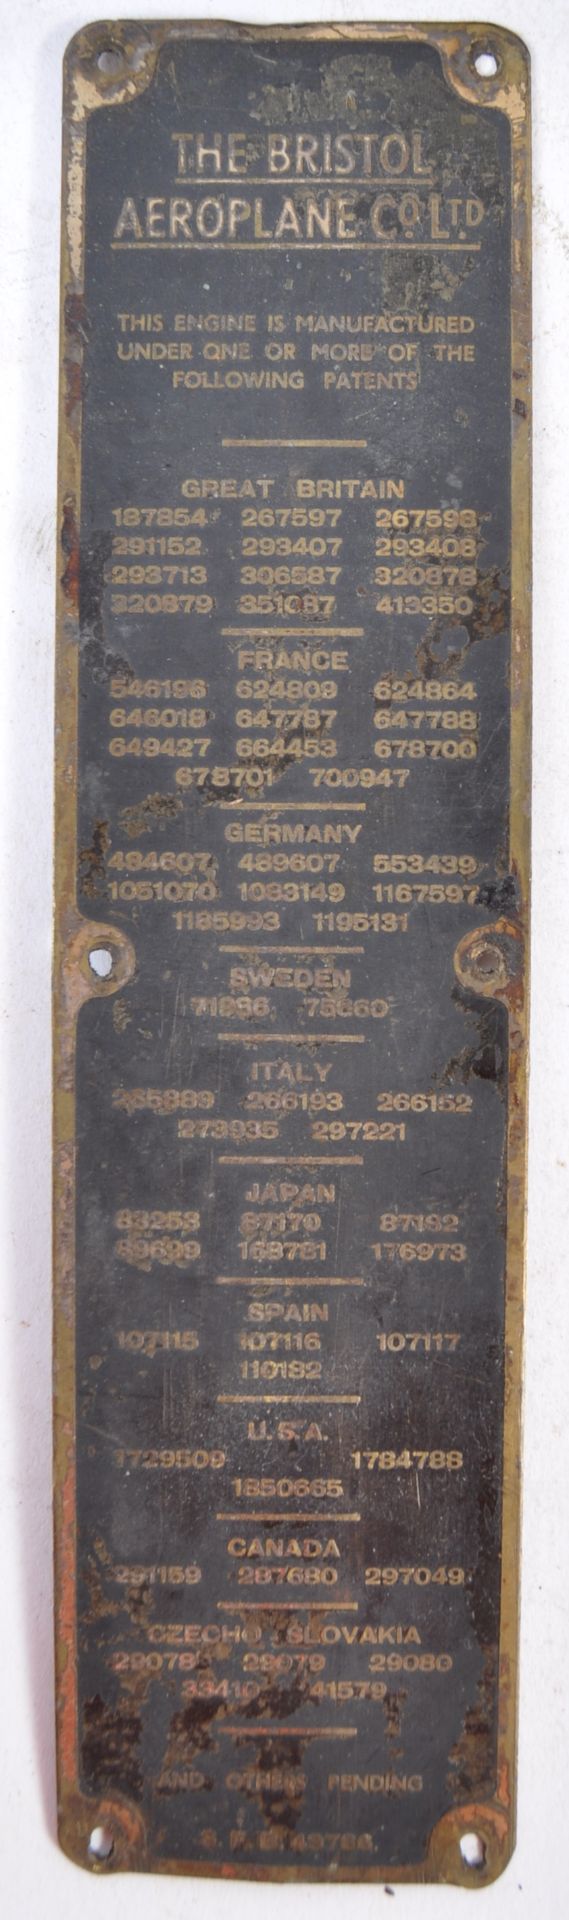 COLLECTION OF WWII PERIOD BRISTOL AEROPLANE CO PLAQUES - Image 2 of 5